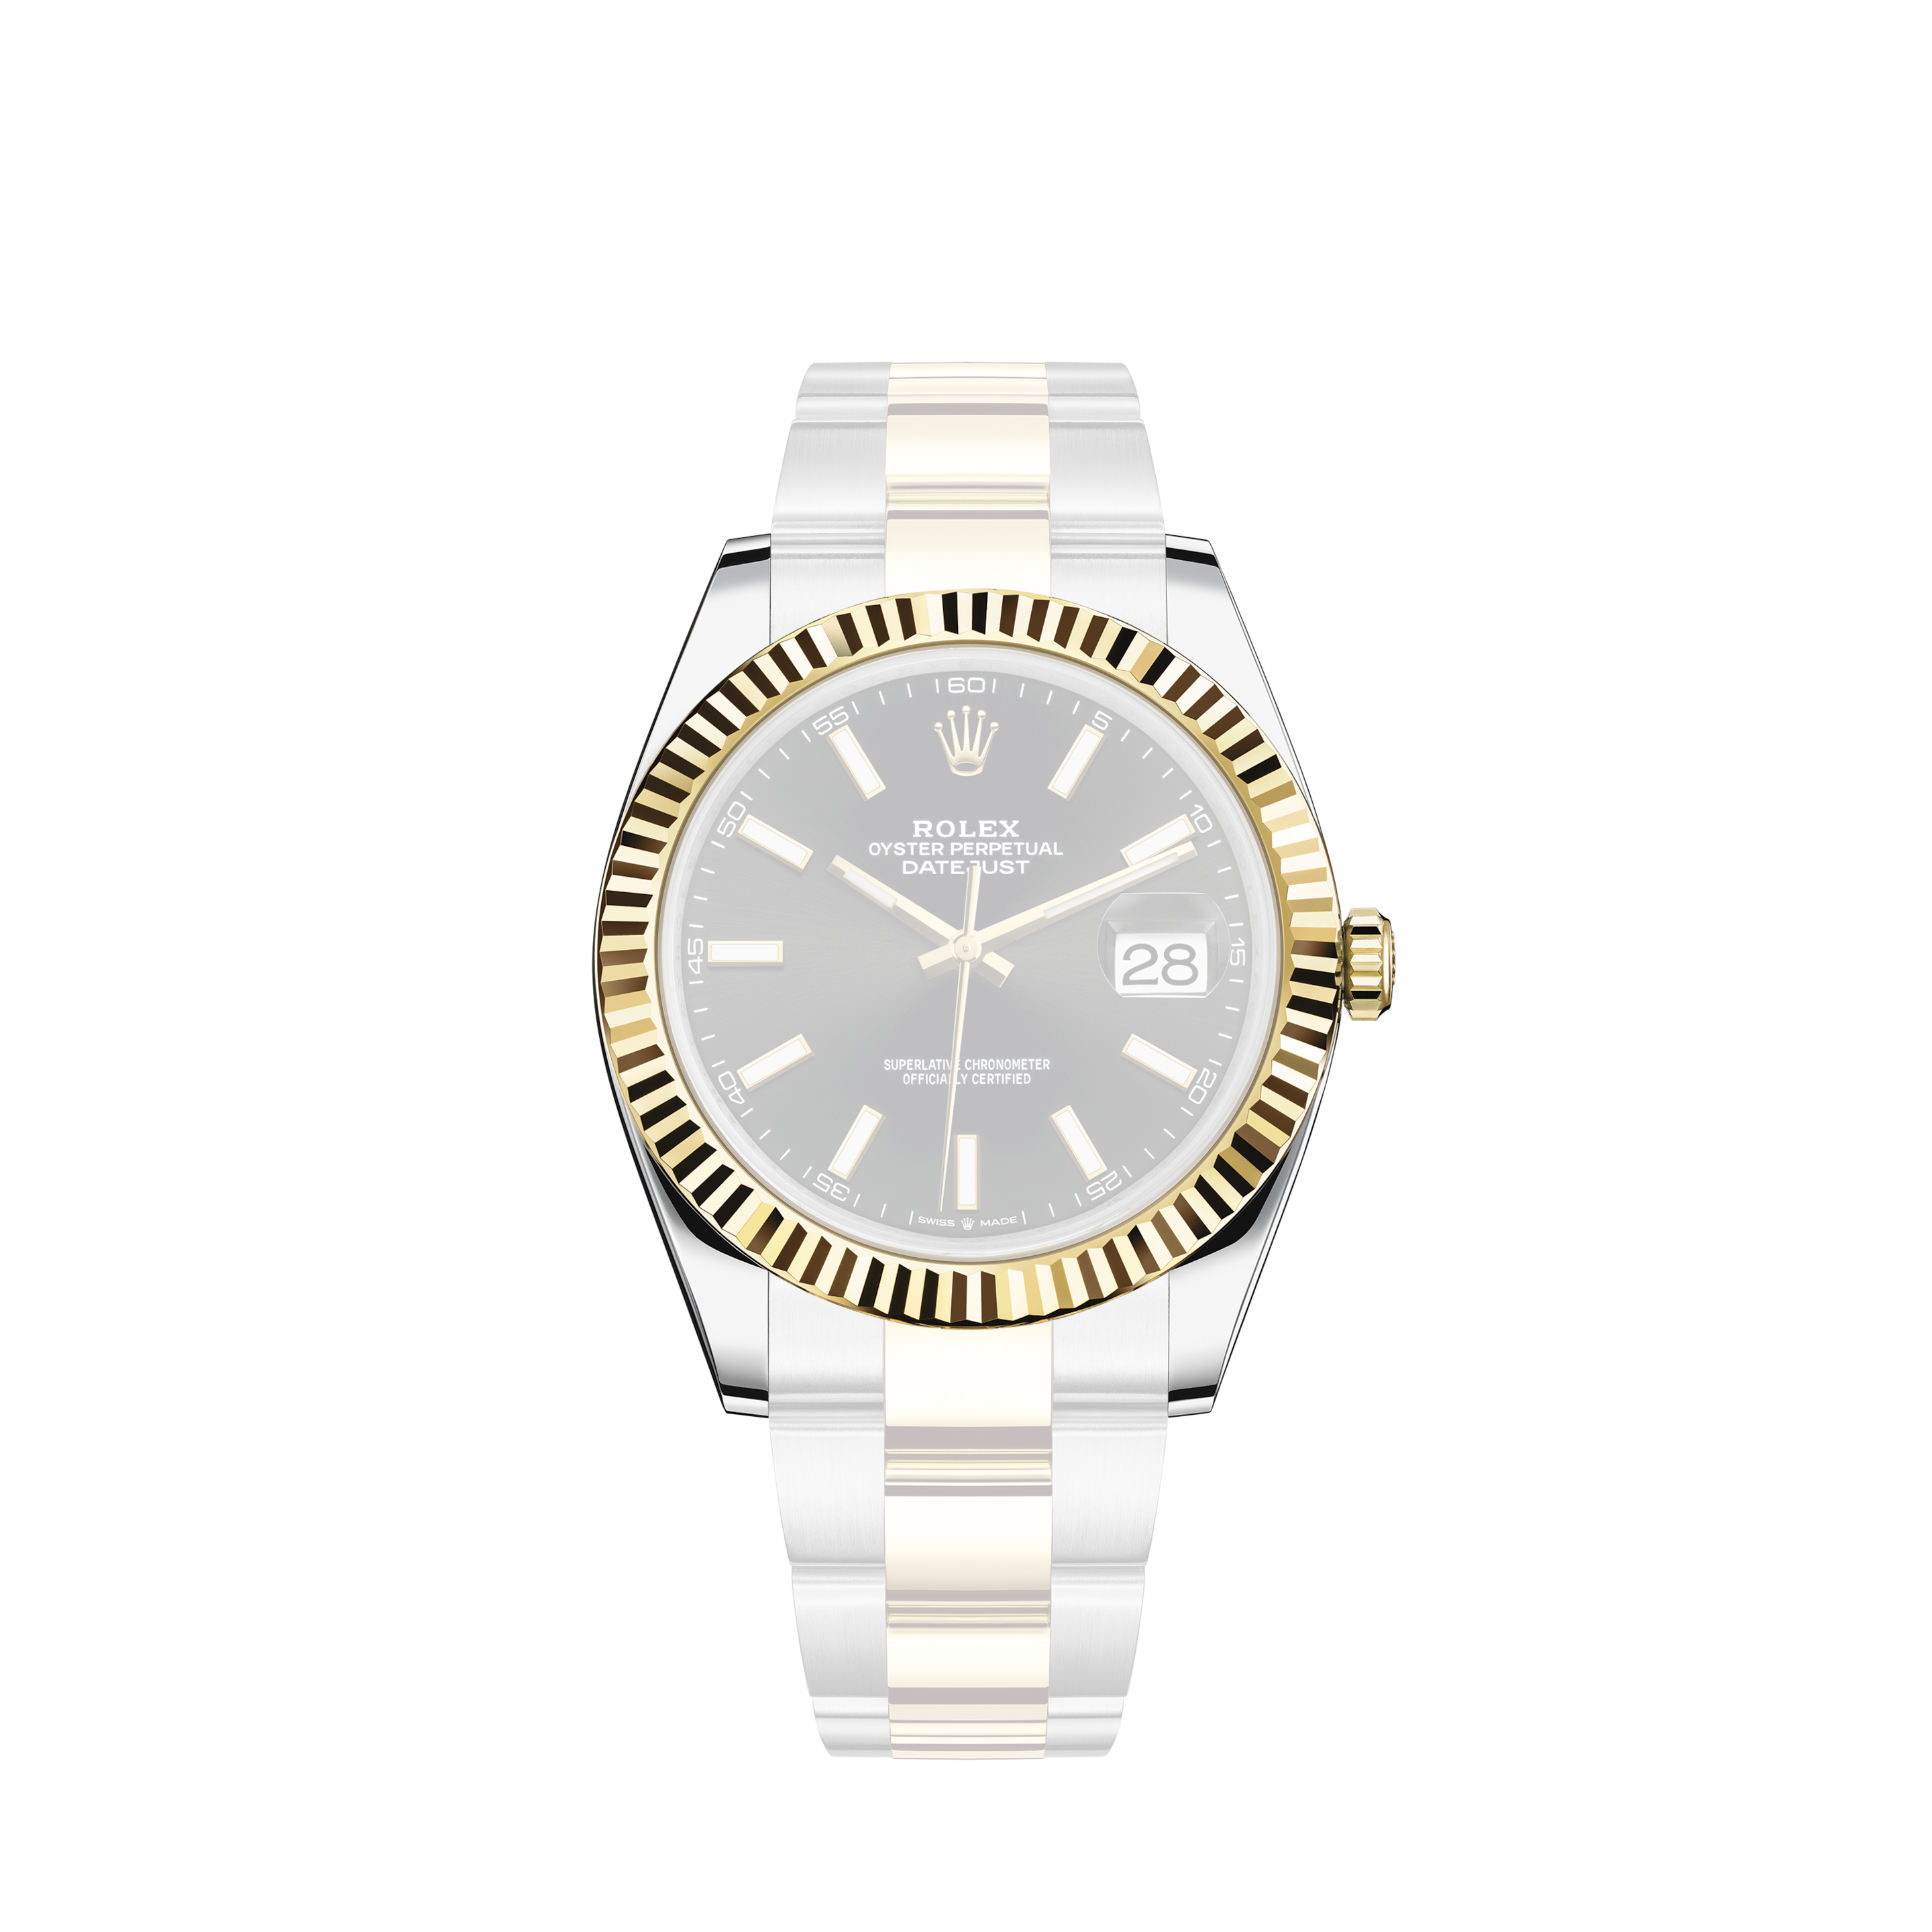 Rolex Submariner - Heritage 6200 Custom refined by EMBER